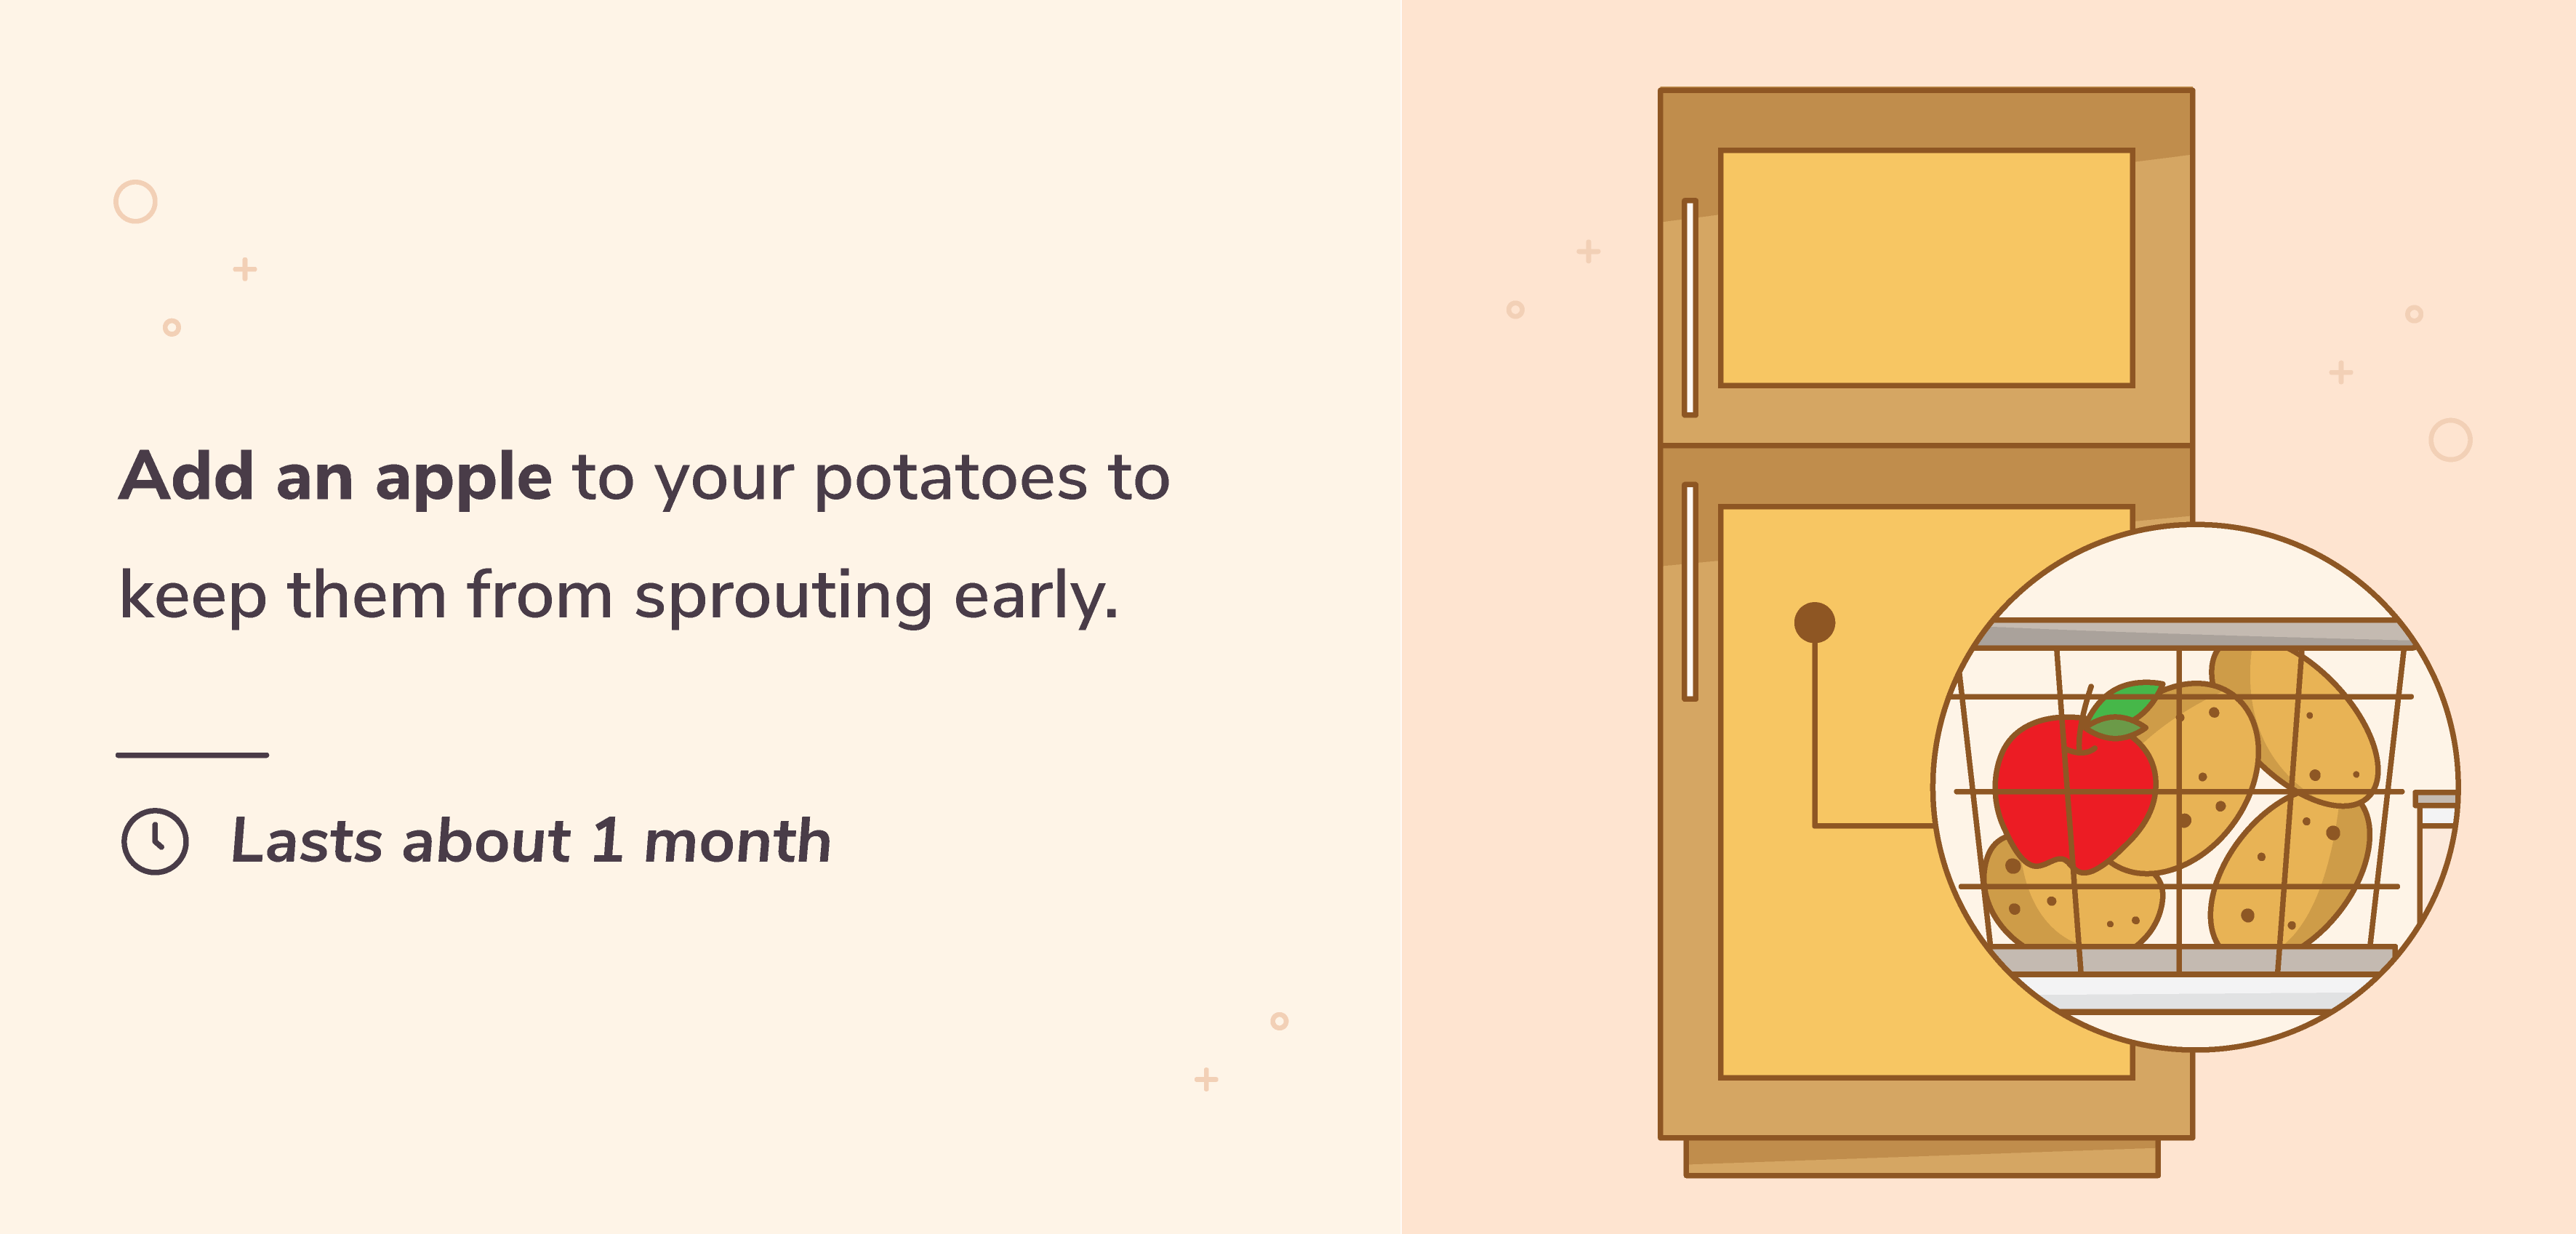 Add an apple to your bag of potatoes to slow down the sprouting process.